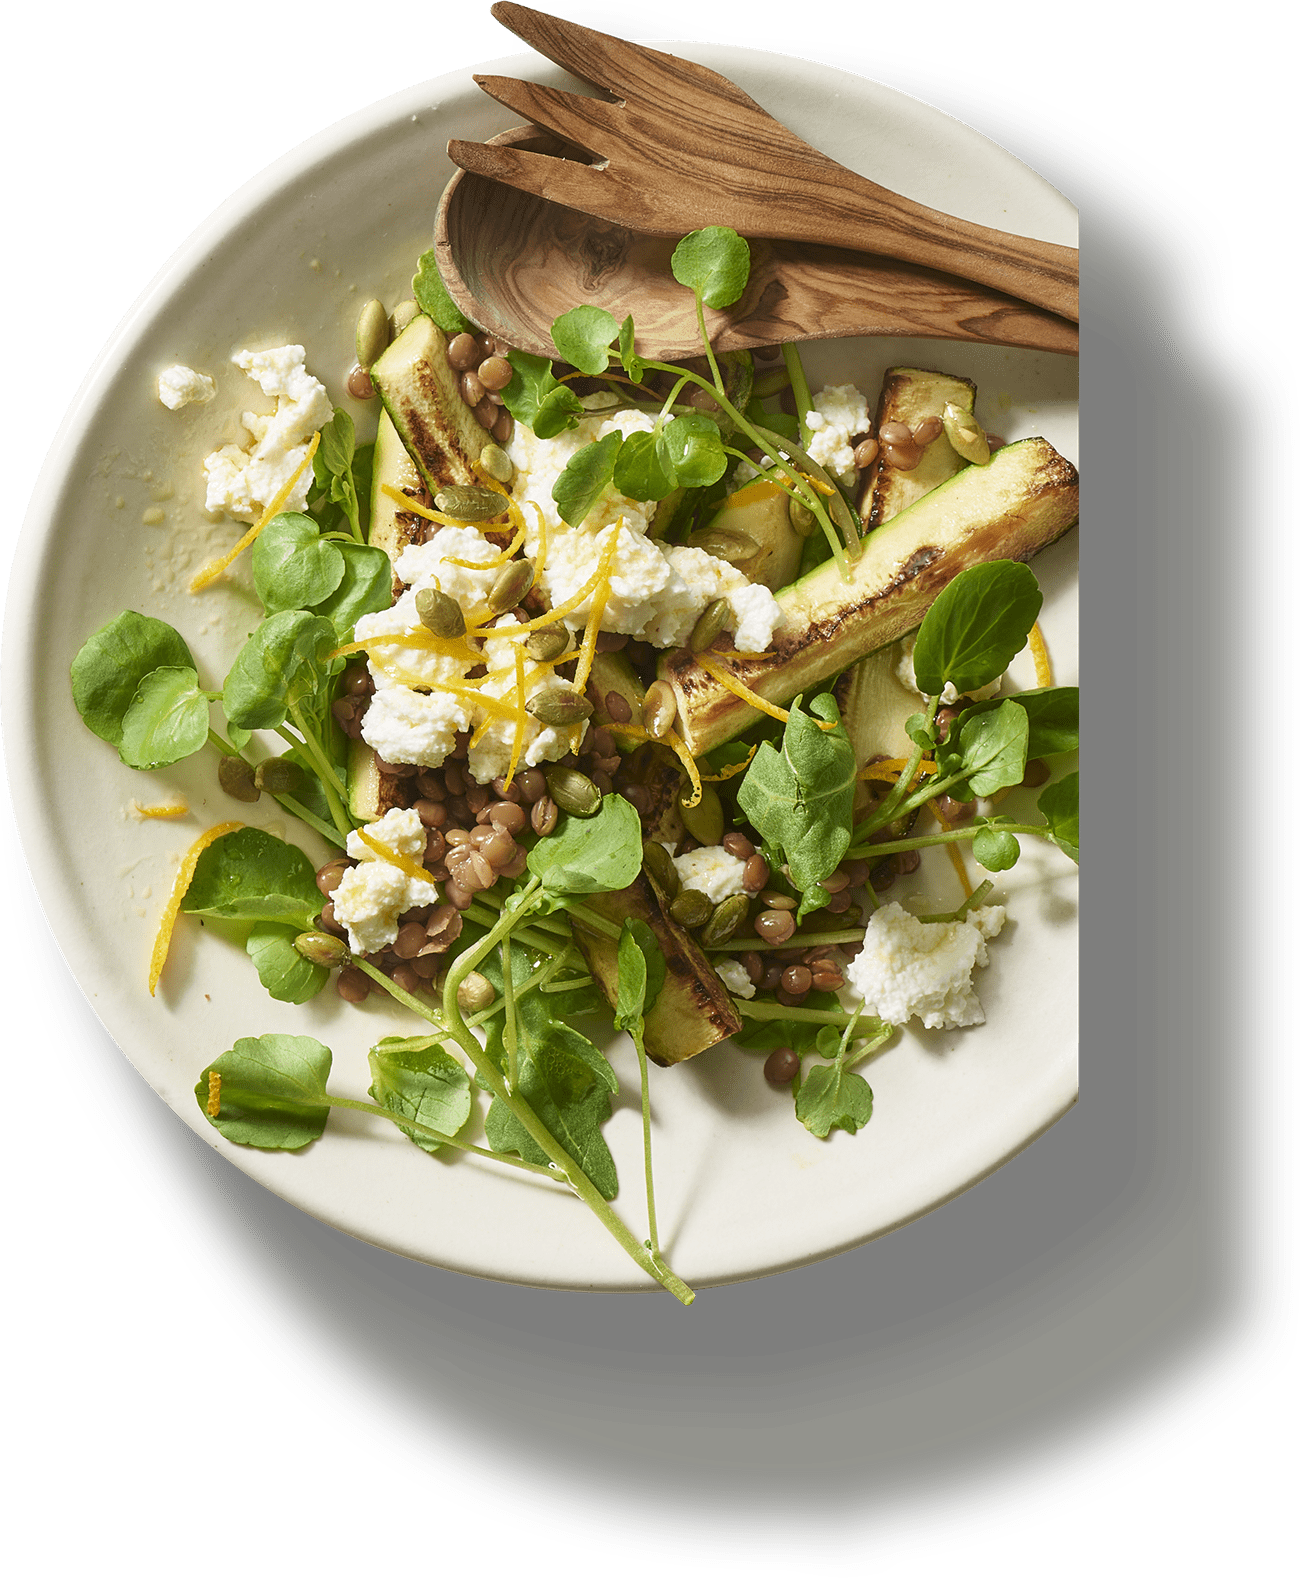 Roasted Zucchini and Cress Salad with Ricotta